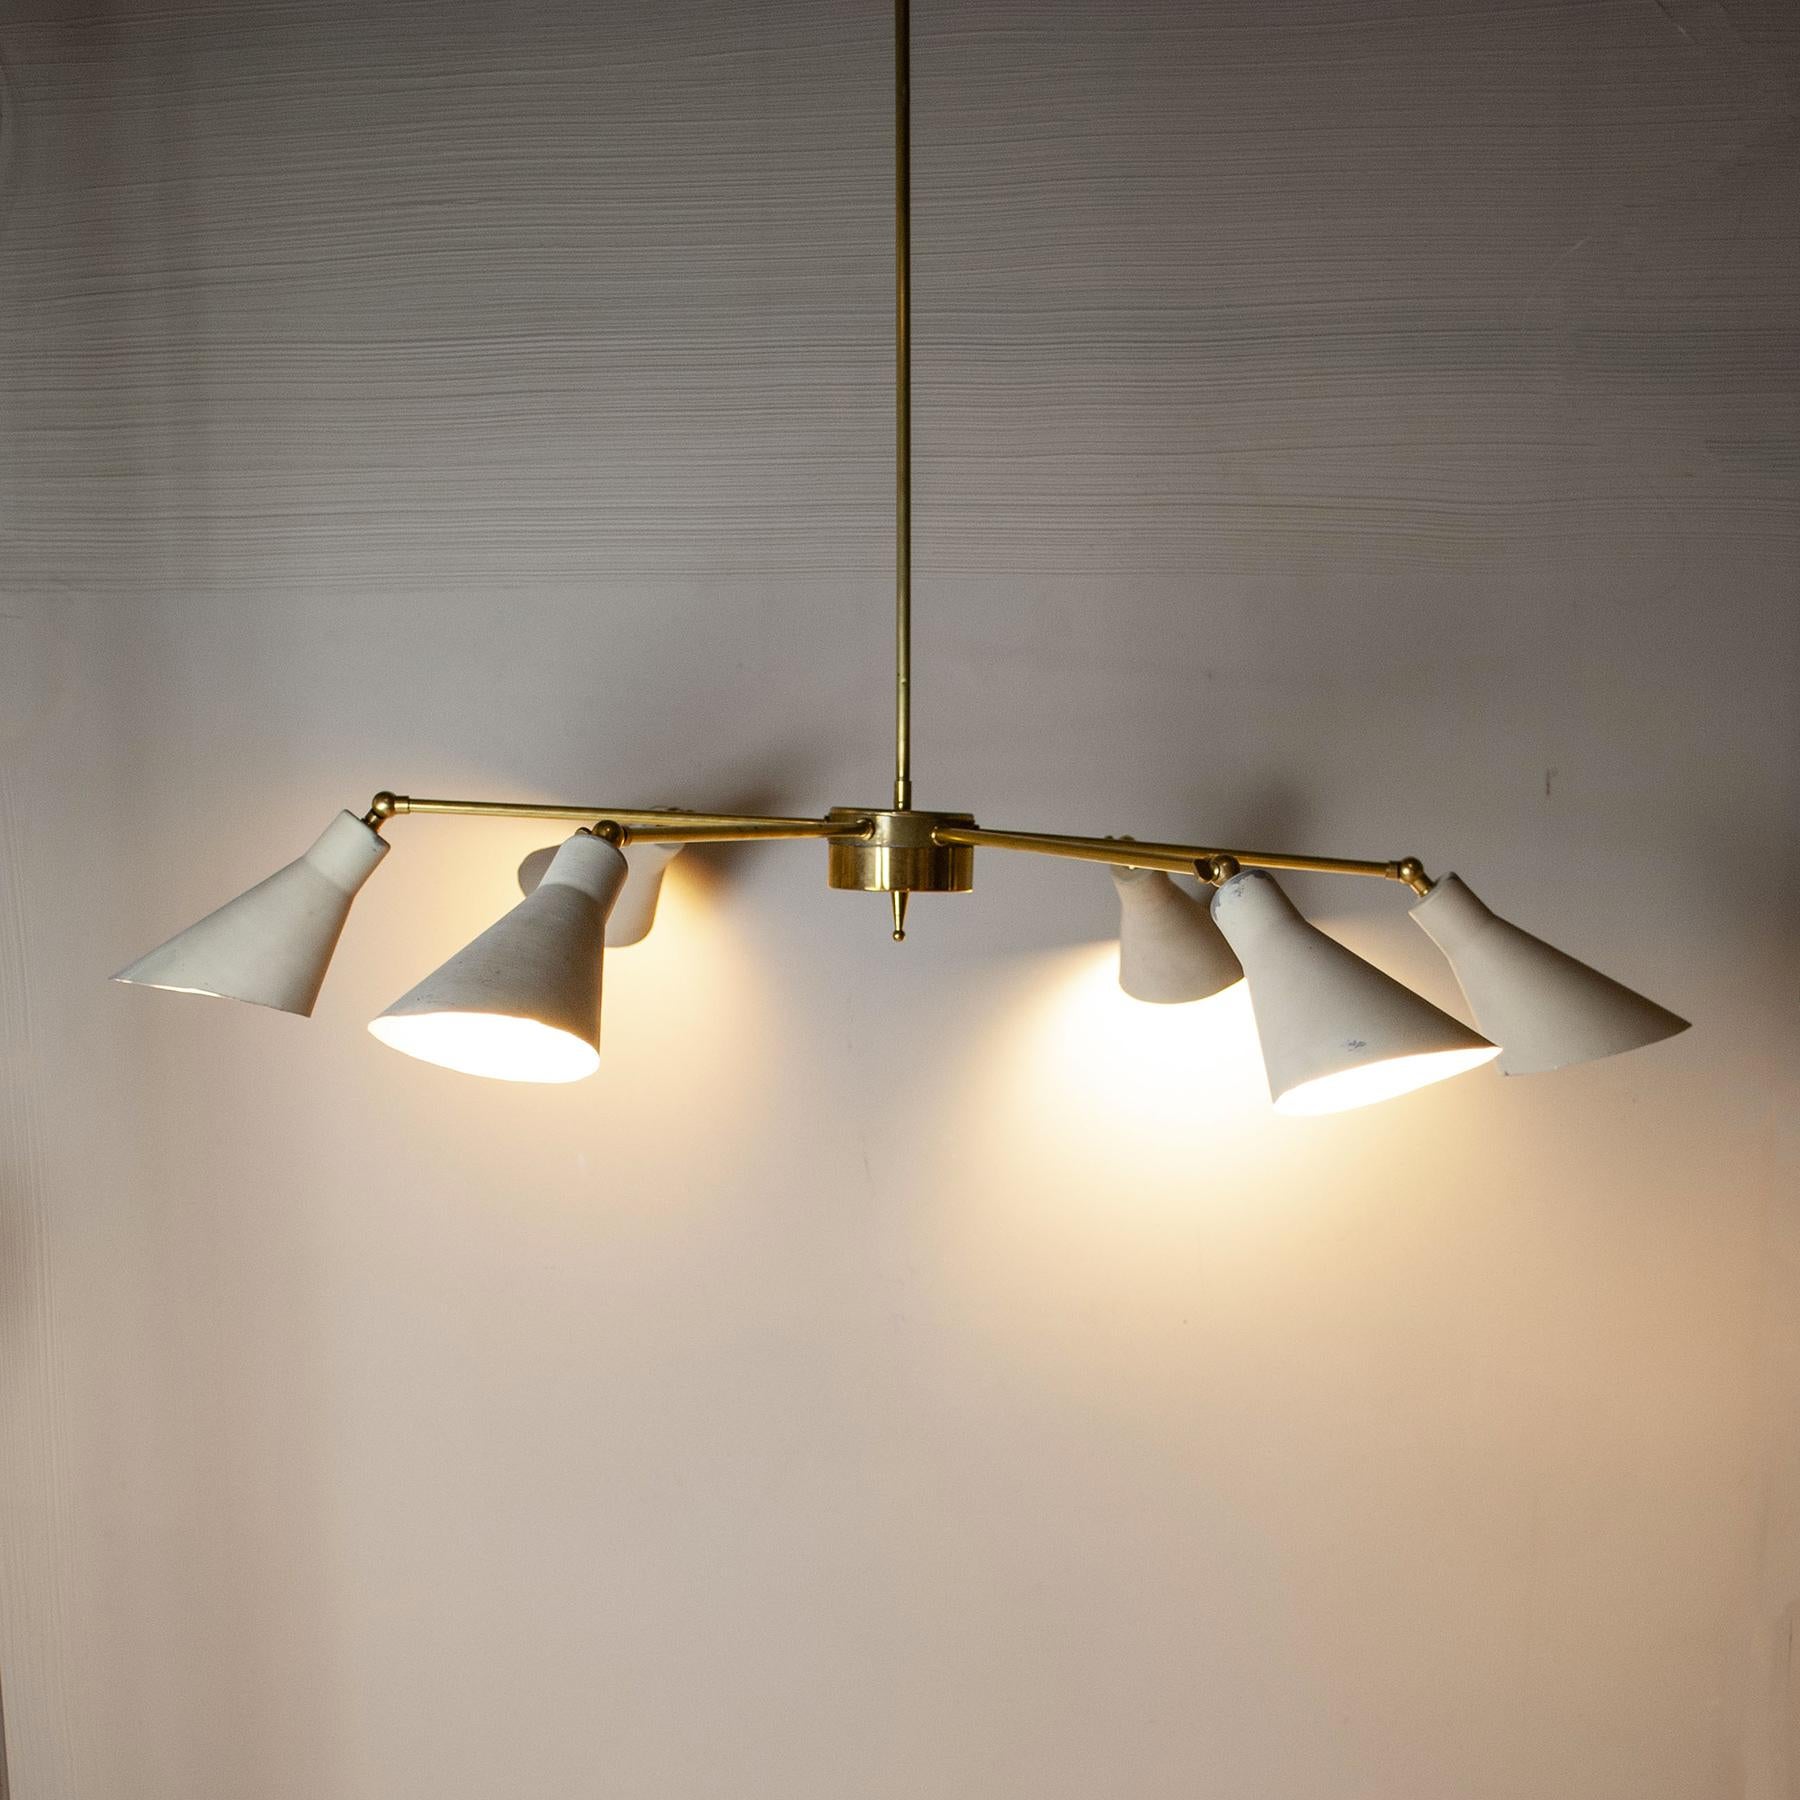 Mid-20th Century Sputnik Chandelier Stilnovo Style from the Fifties For Sale